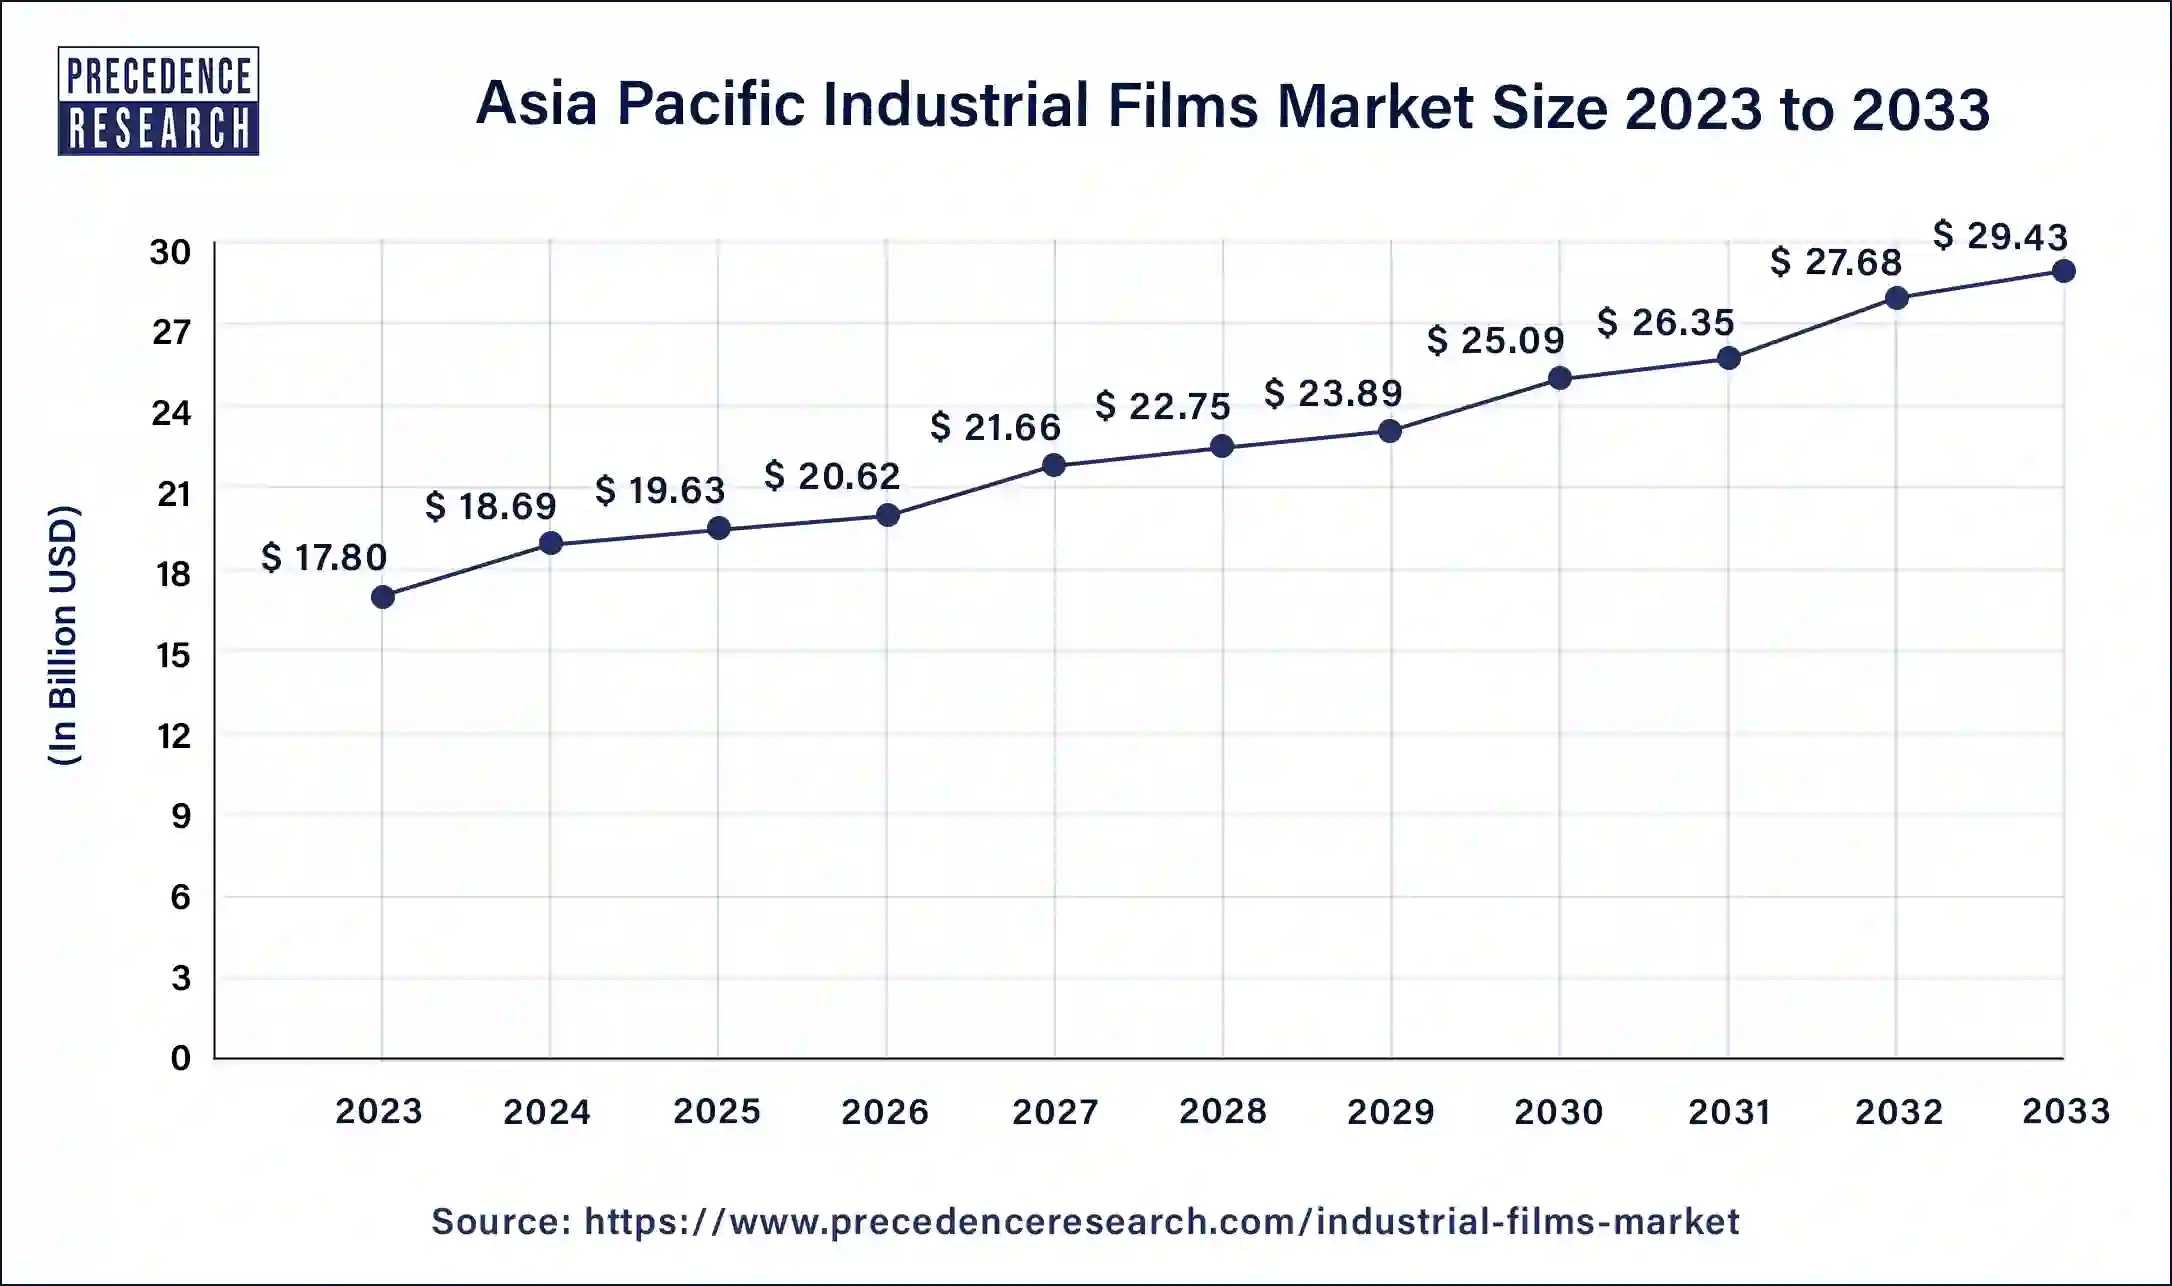 Asia Pacific Industrial Films Market Size 2024 to 2033